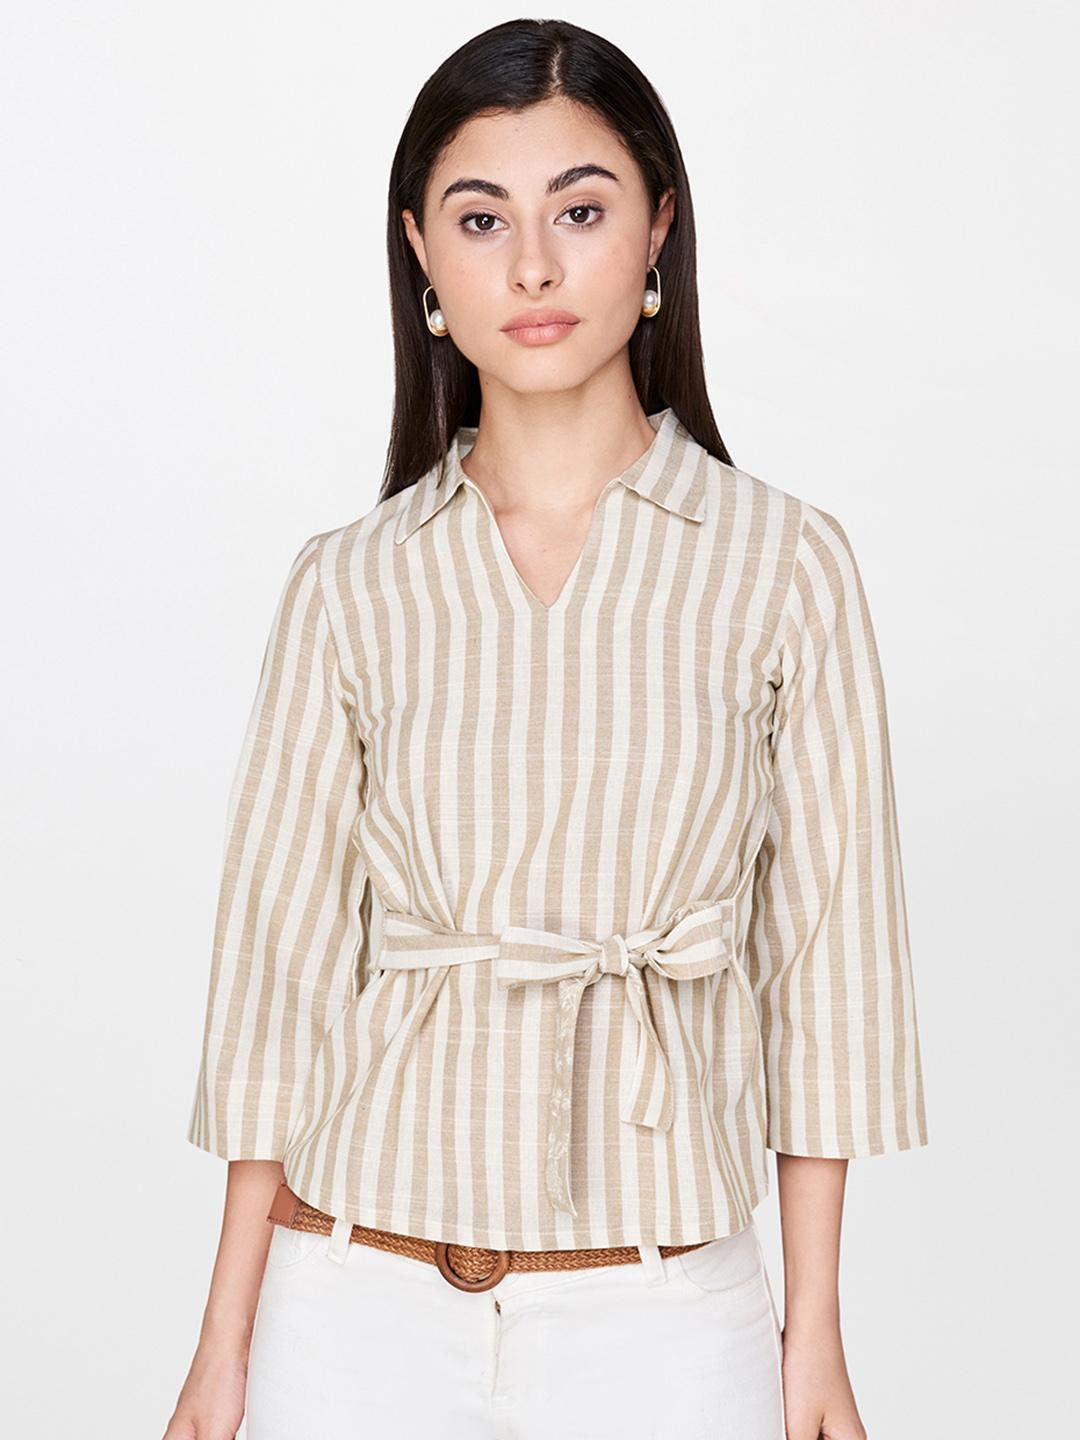 AND Women Beige & White Striped Linen Top Price in India